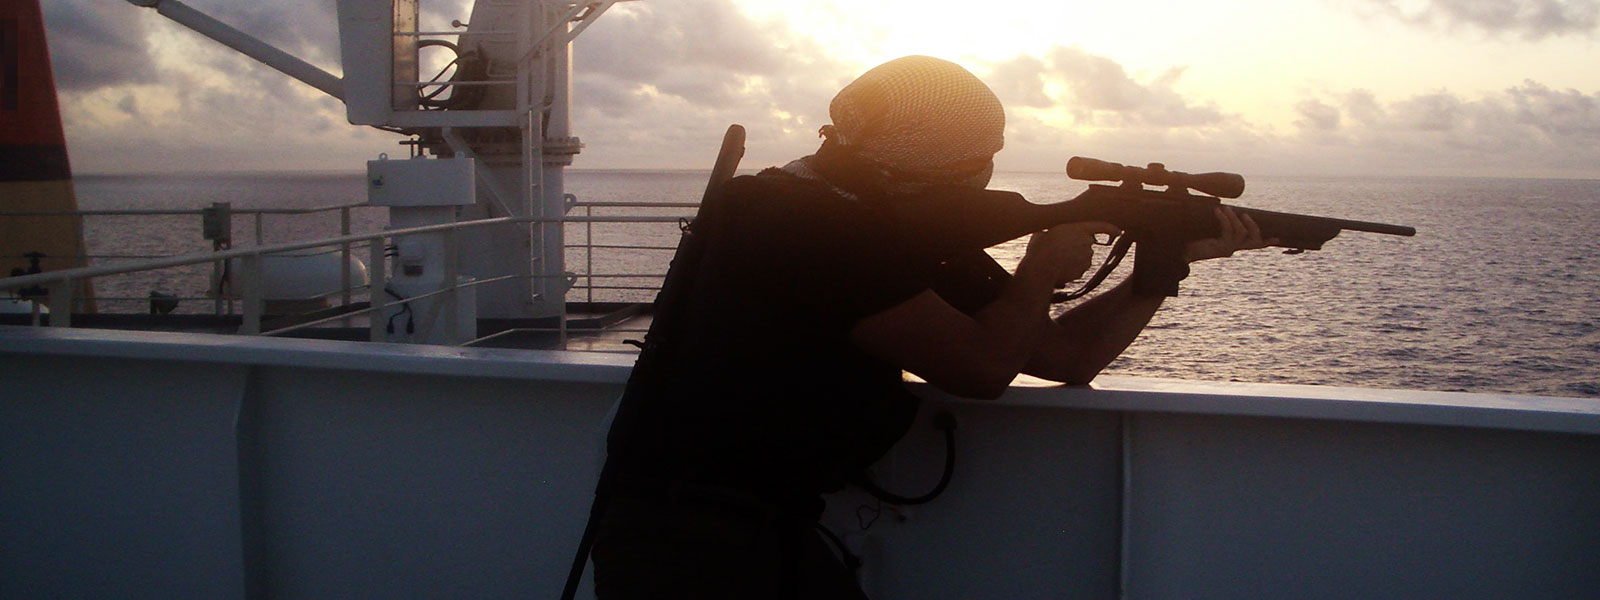 maritime security services attending agent